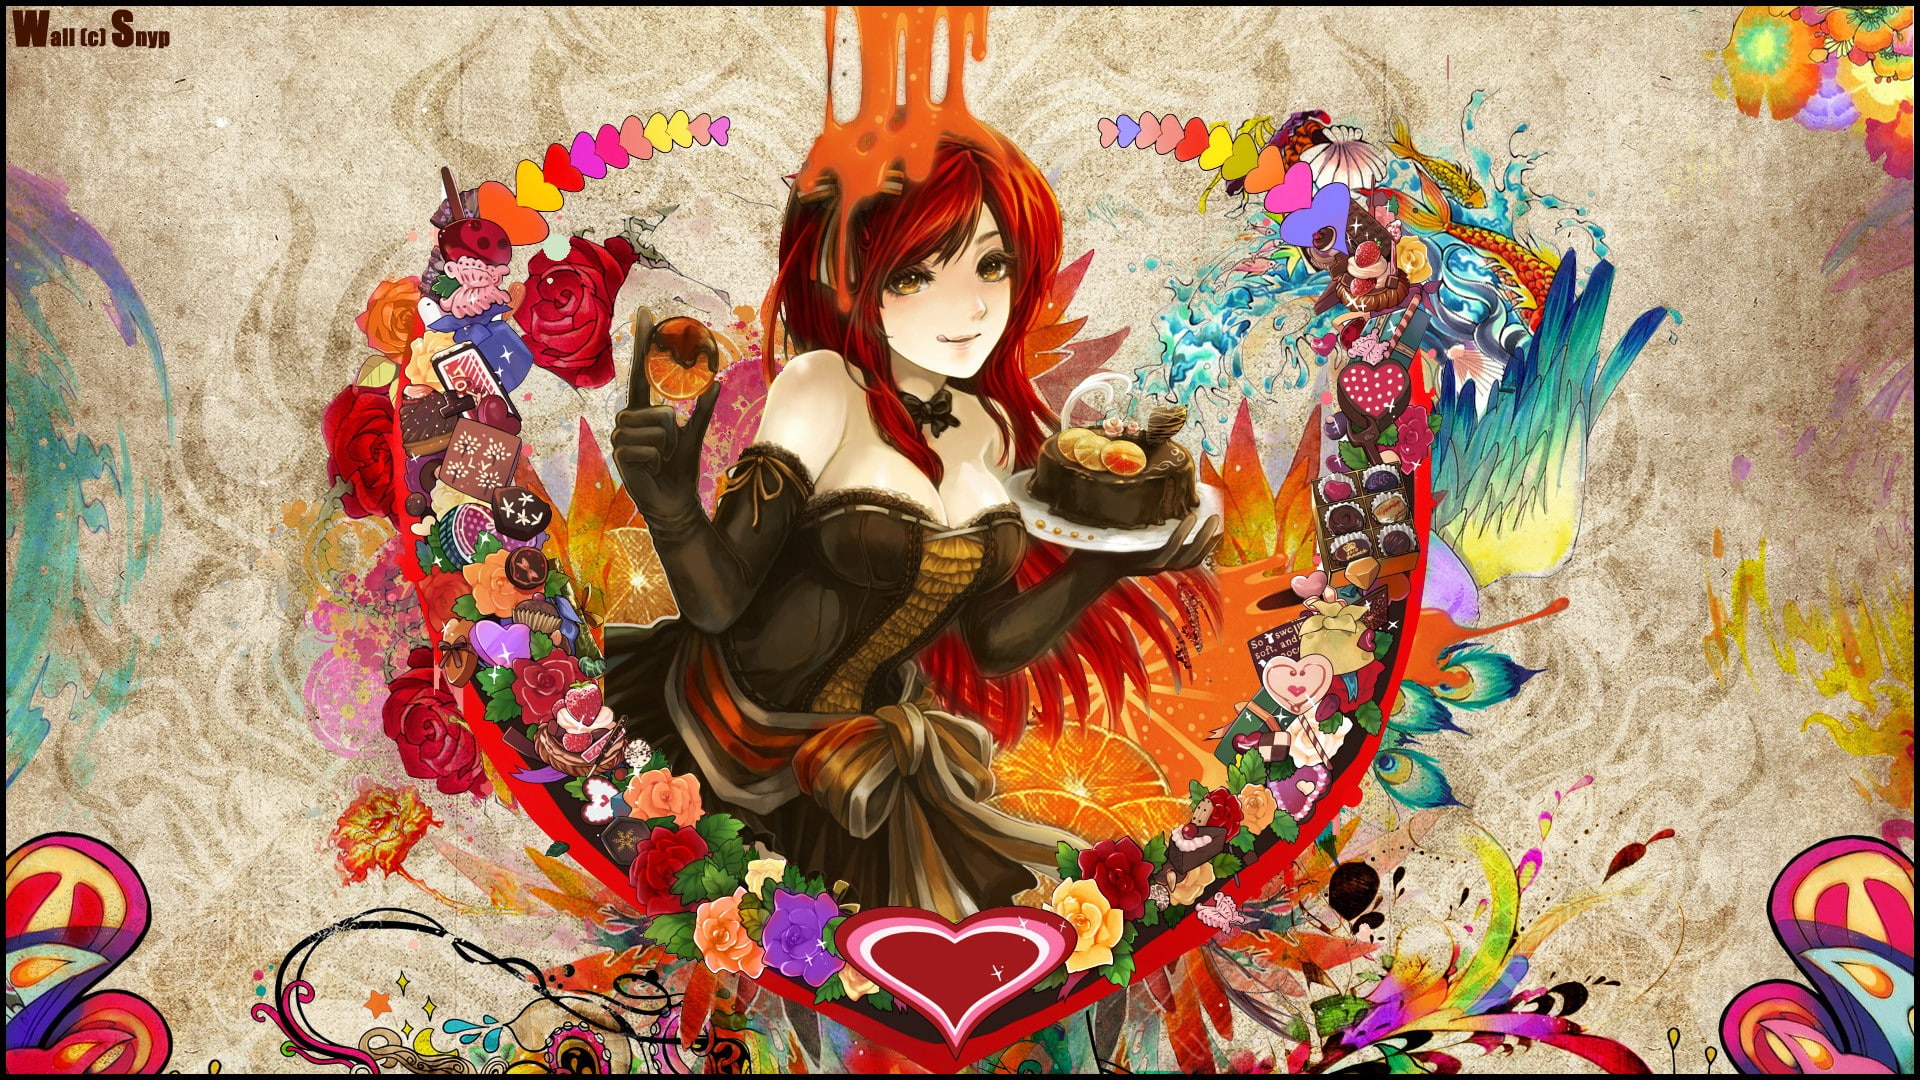 Anime, Cakes, Hearts, Colorful, Flowers, Original Characters, Redhead, Anime Girls, female art painting